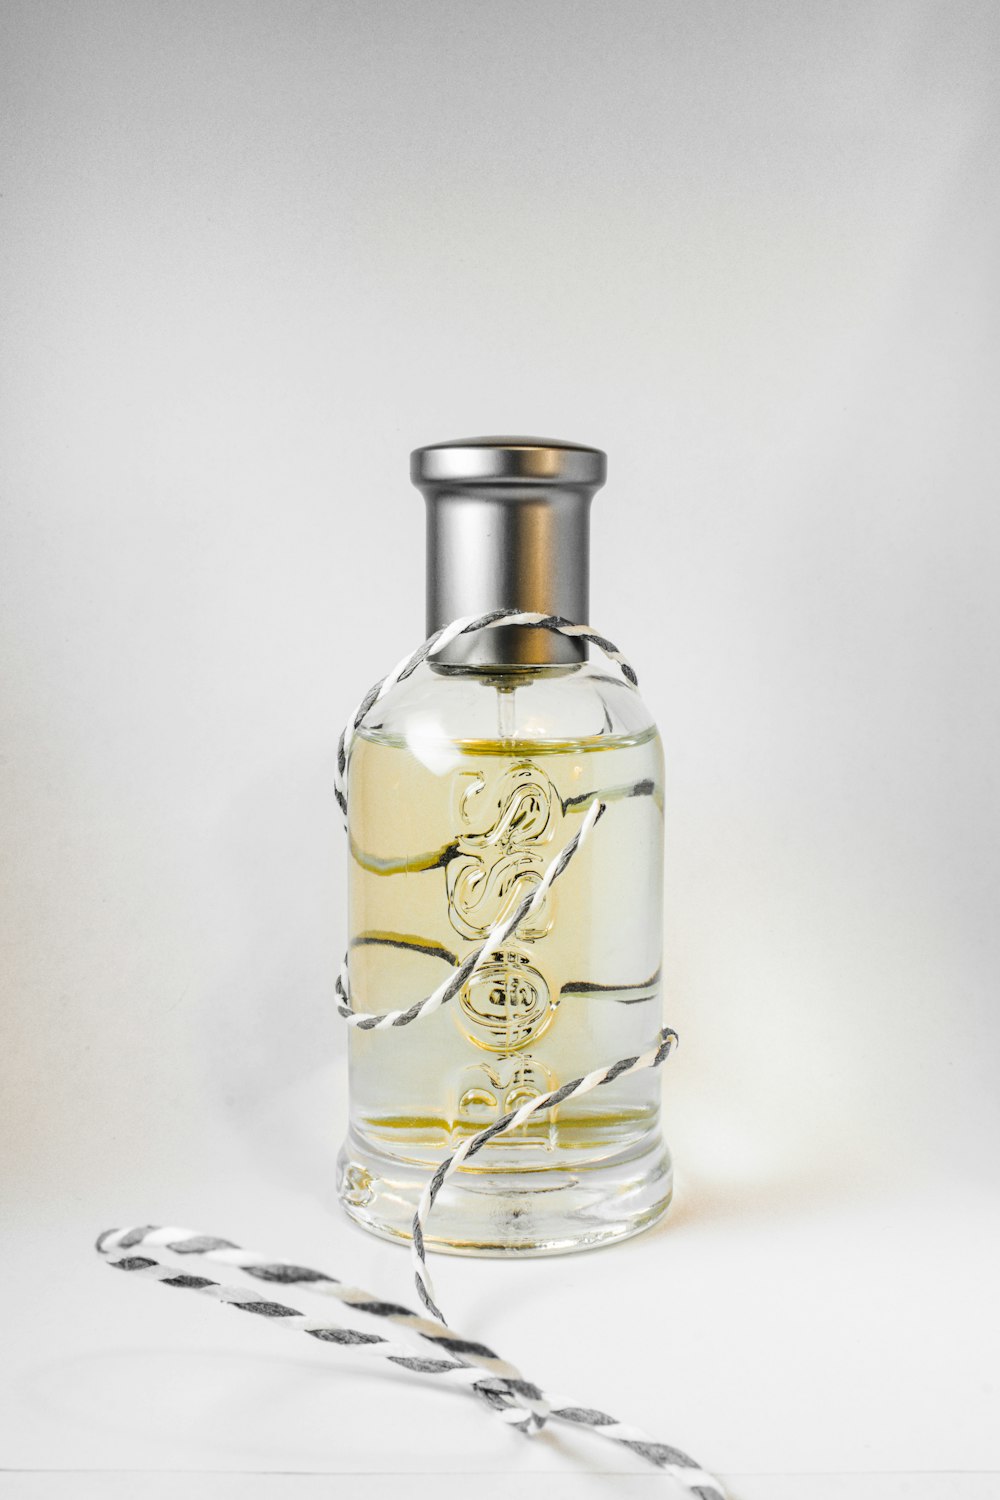 clear glass bottle with gold liquid